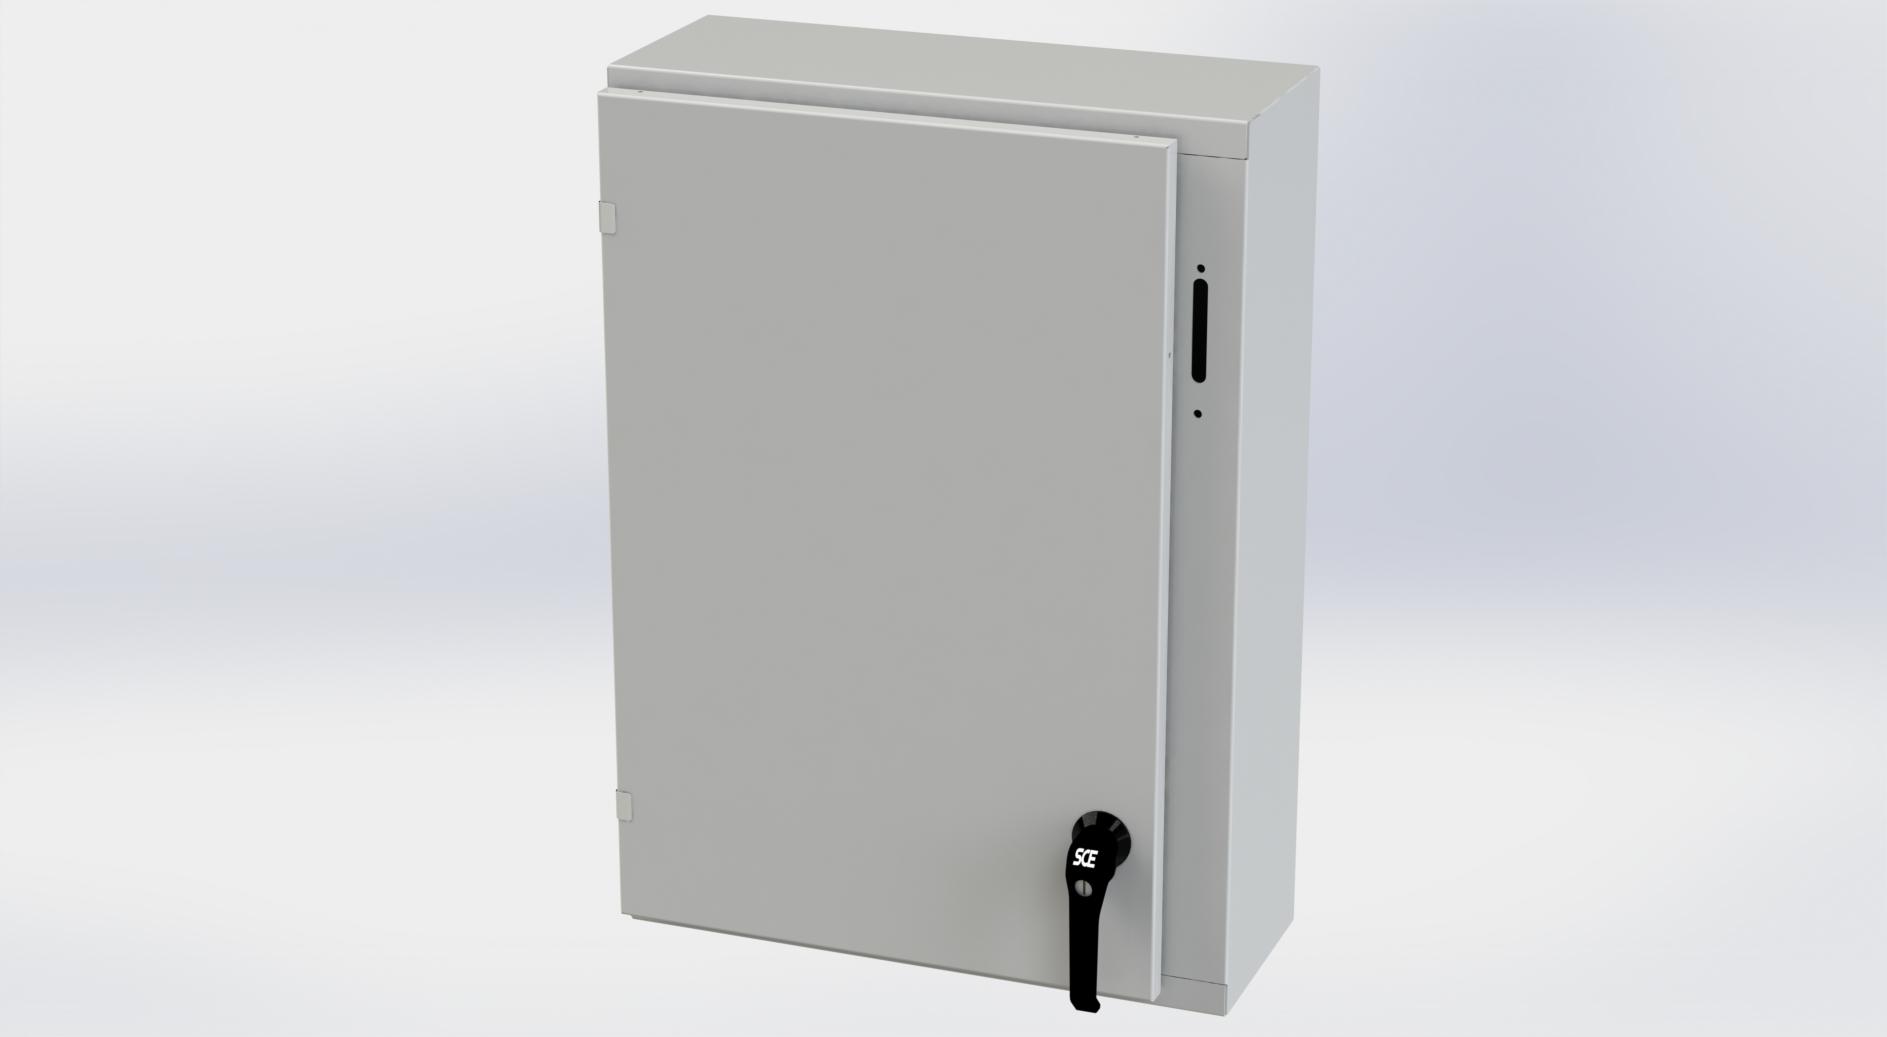 Saginaw Control SCE-30XEL2108LPLG XEL LP Enclosure, Height:30.00", Width:21.38", Depth:8.00", RAL 7035 gray powder coating inside and out. Optional sub-panels are powder coated white.